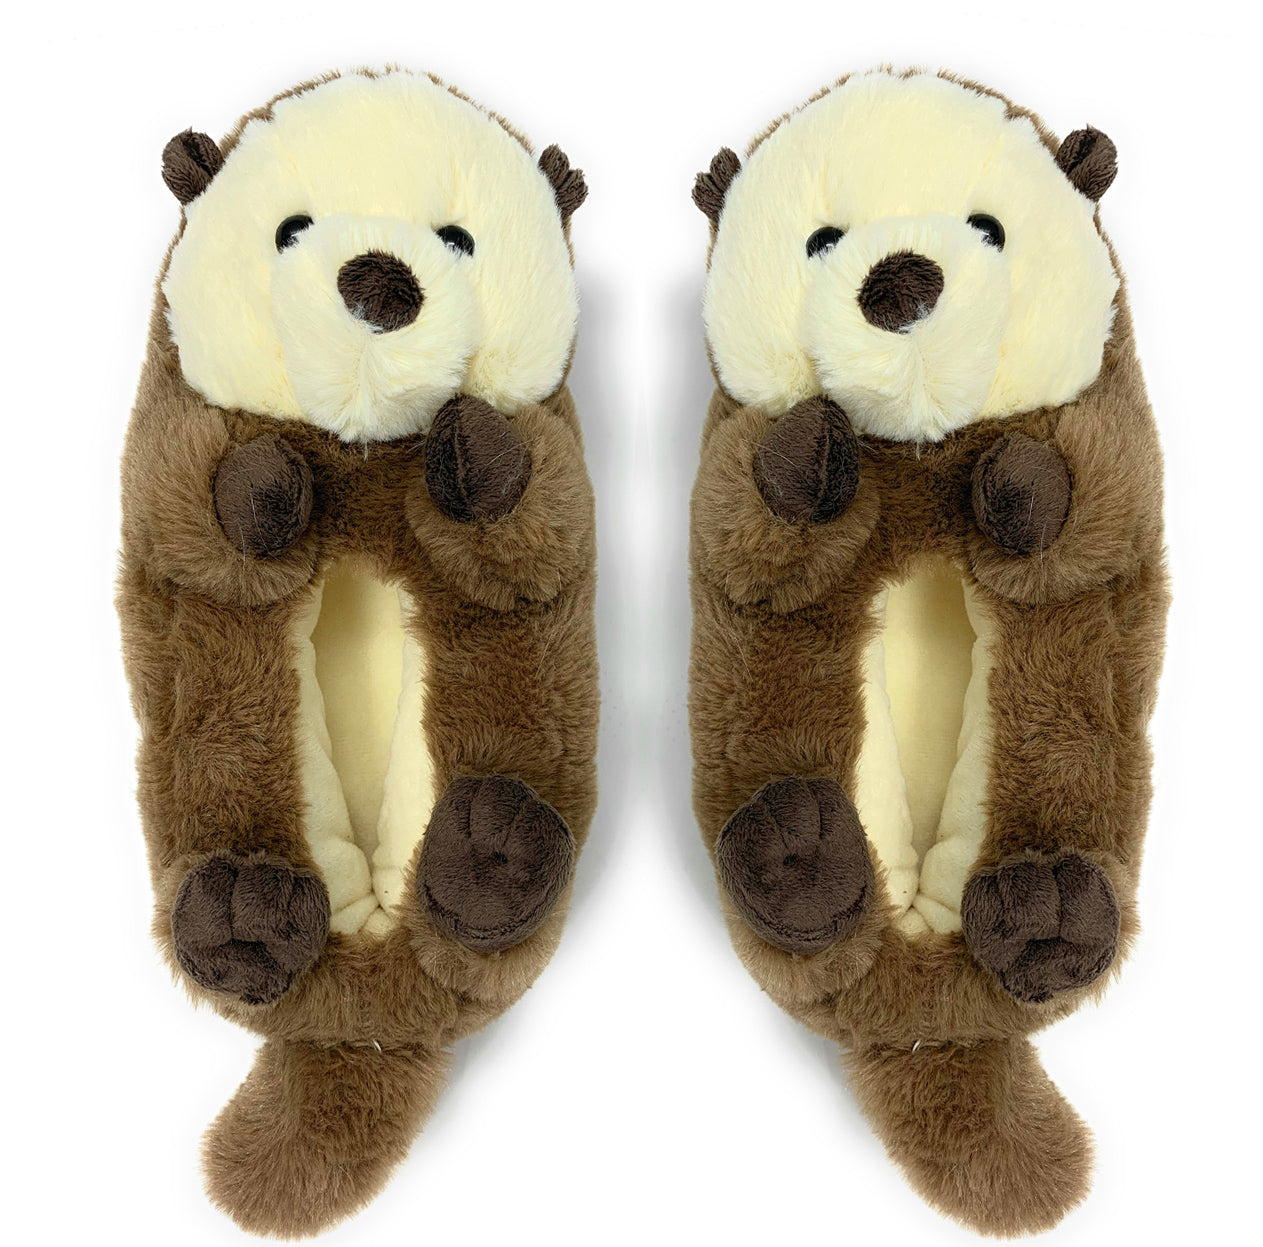 Otter One Fuzzy Slippers for Women